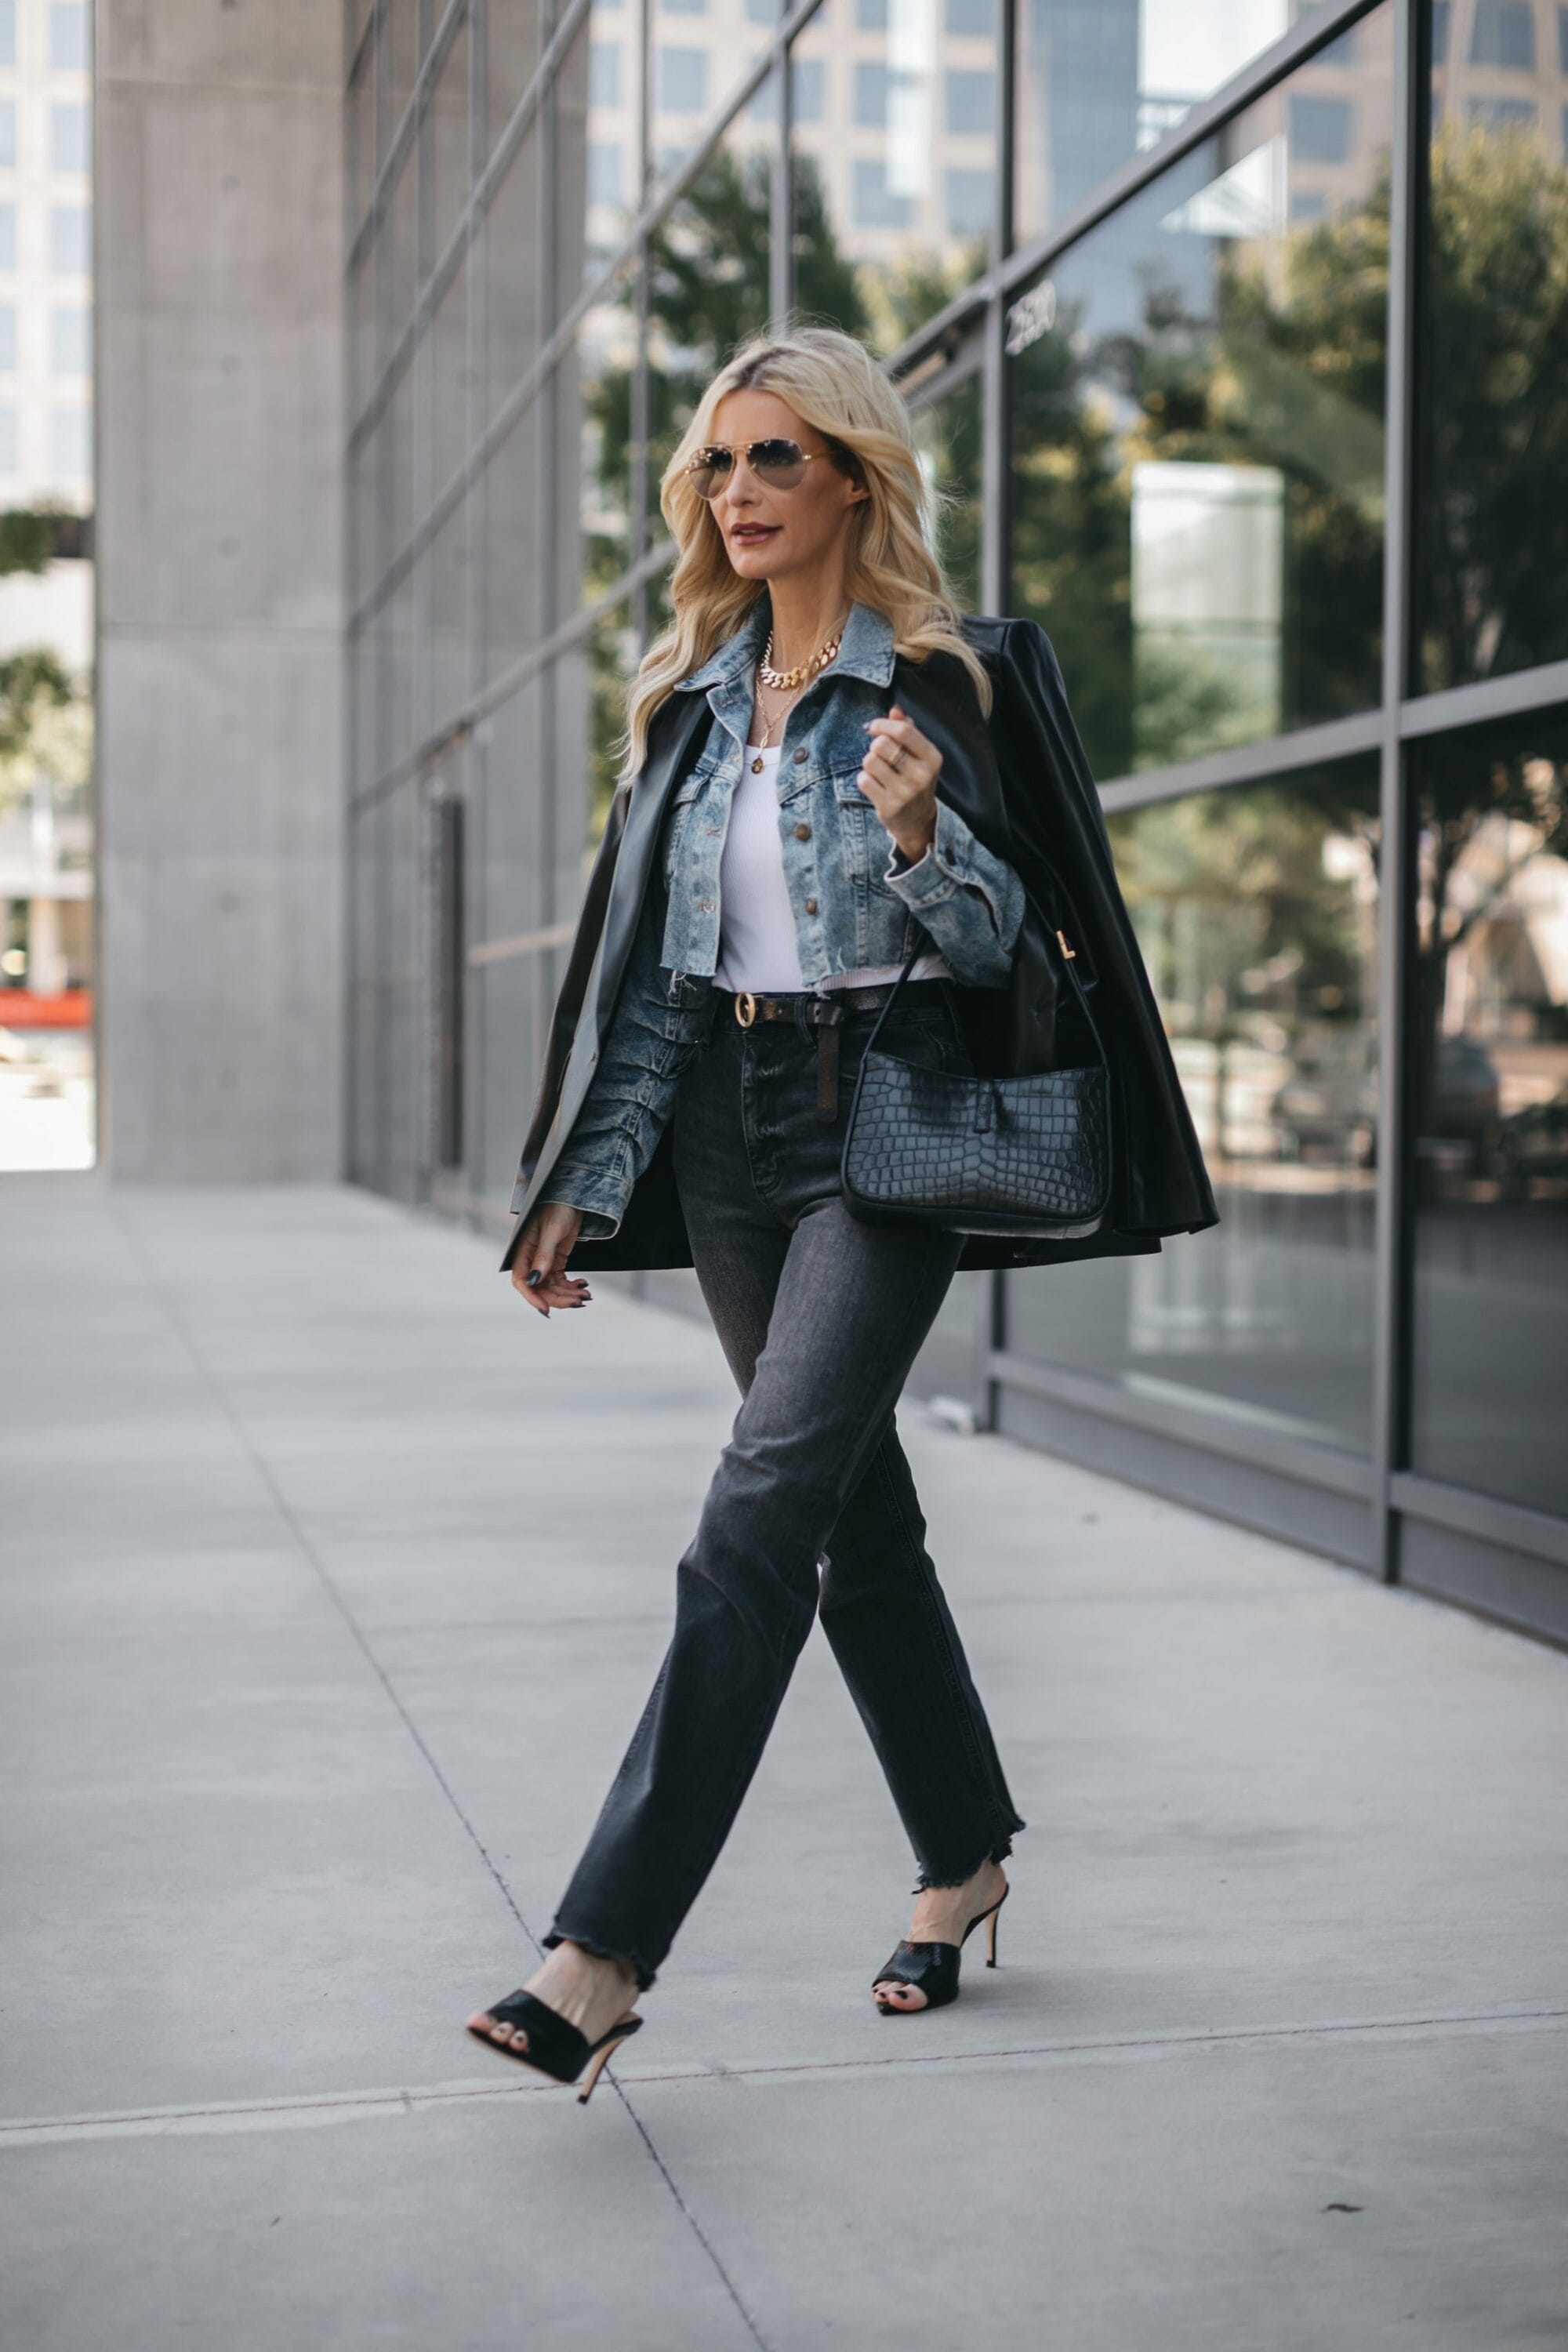 Dallas influencer over 40 wearing straight leg jeans and a white tank as as example of the best base layer for layering fall jackets.